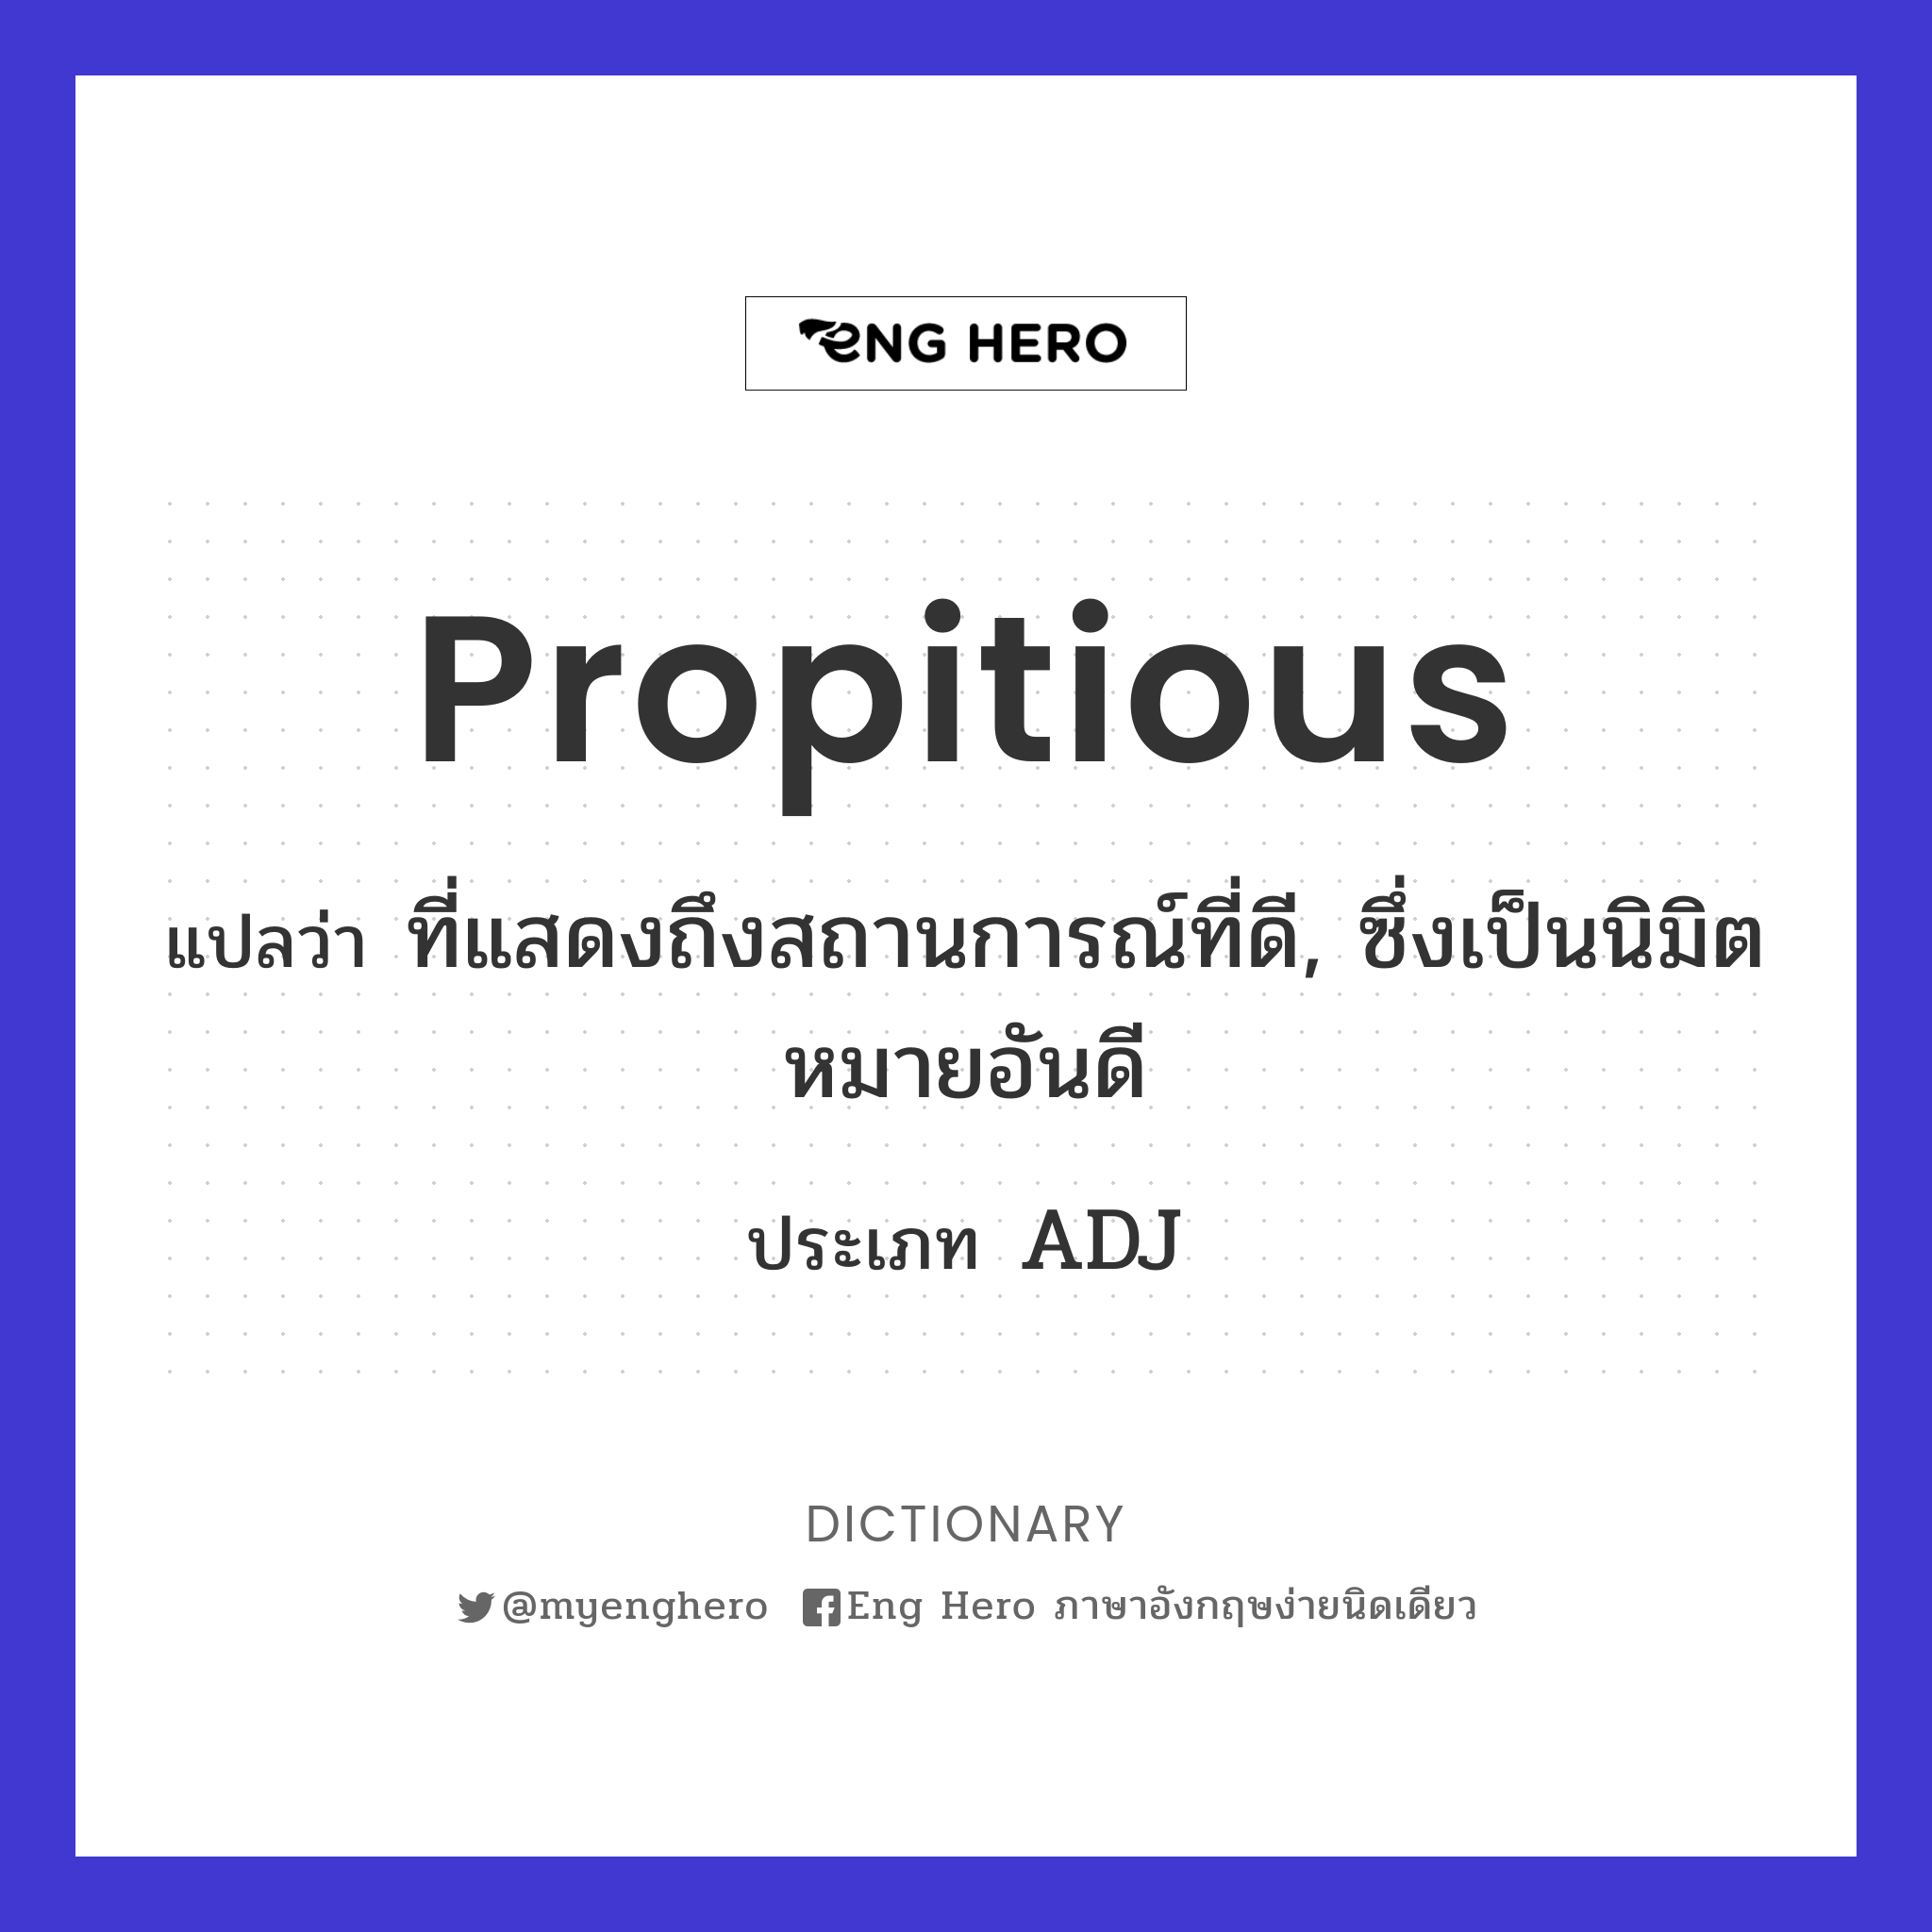 propitious